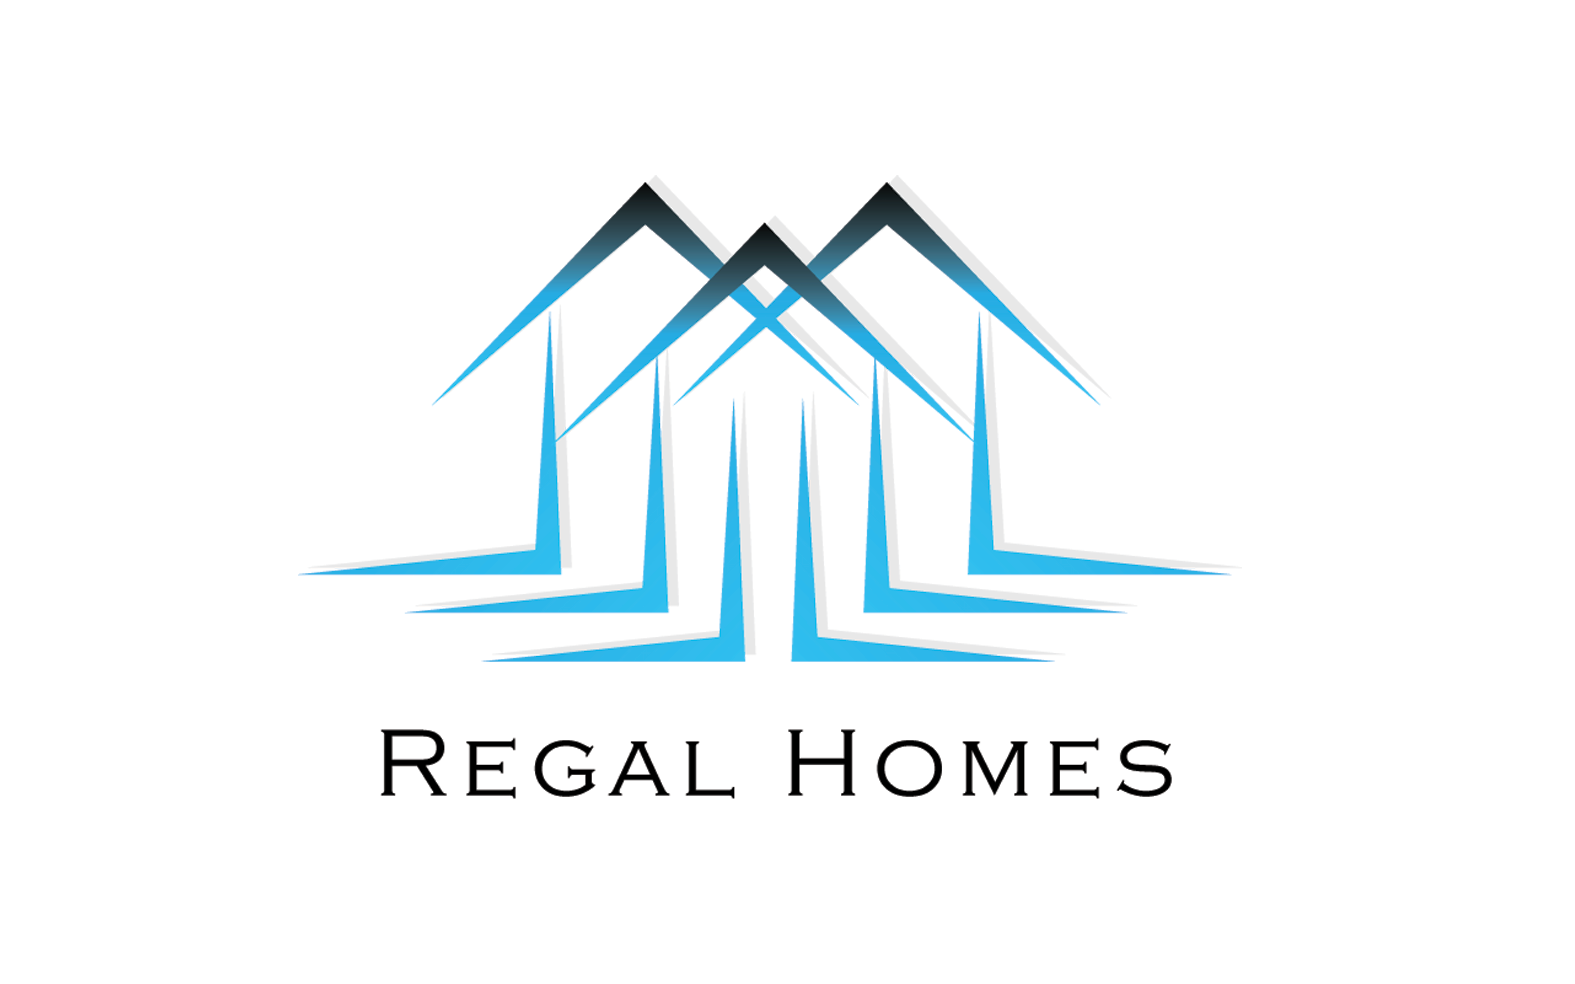 Real Estate Logos  Inno Garage Consulting  Management Consulting 